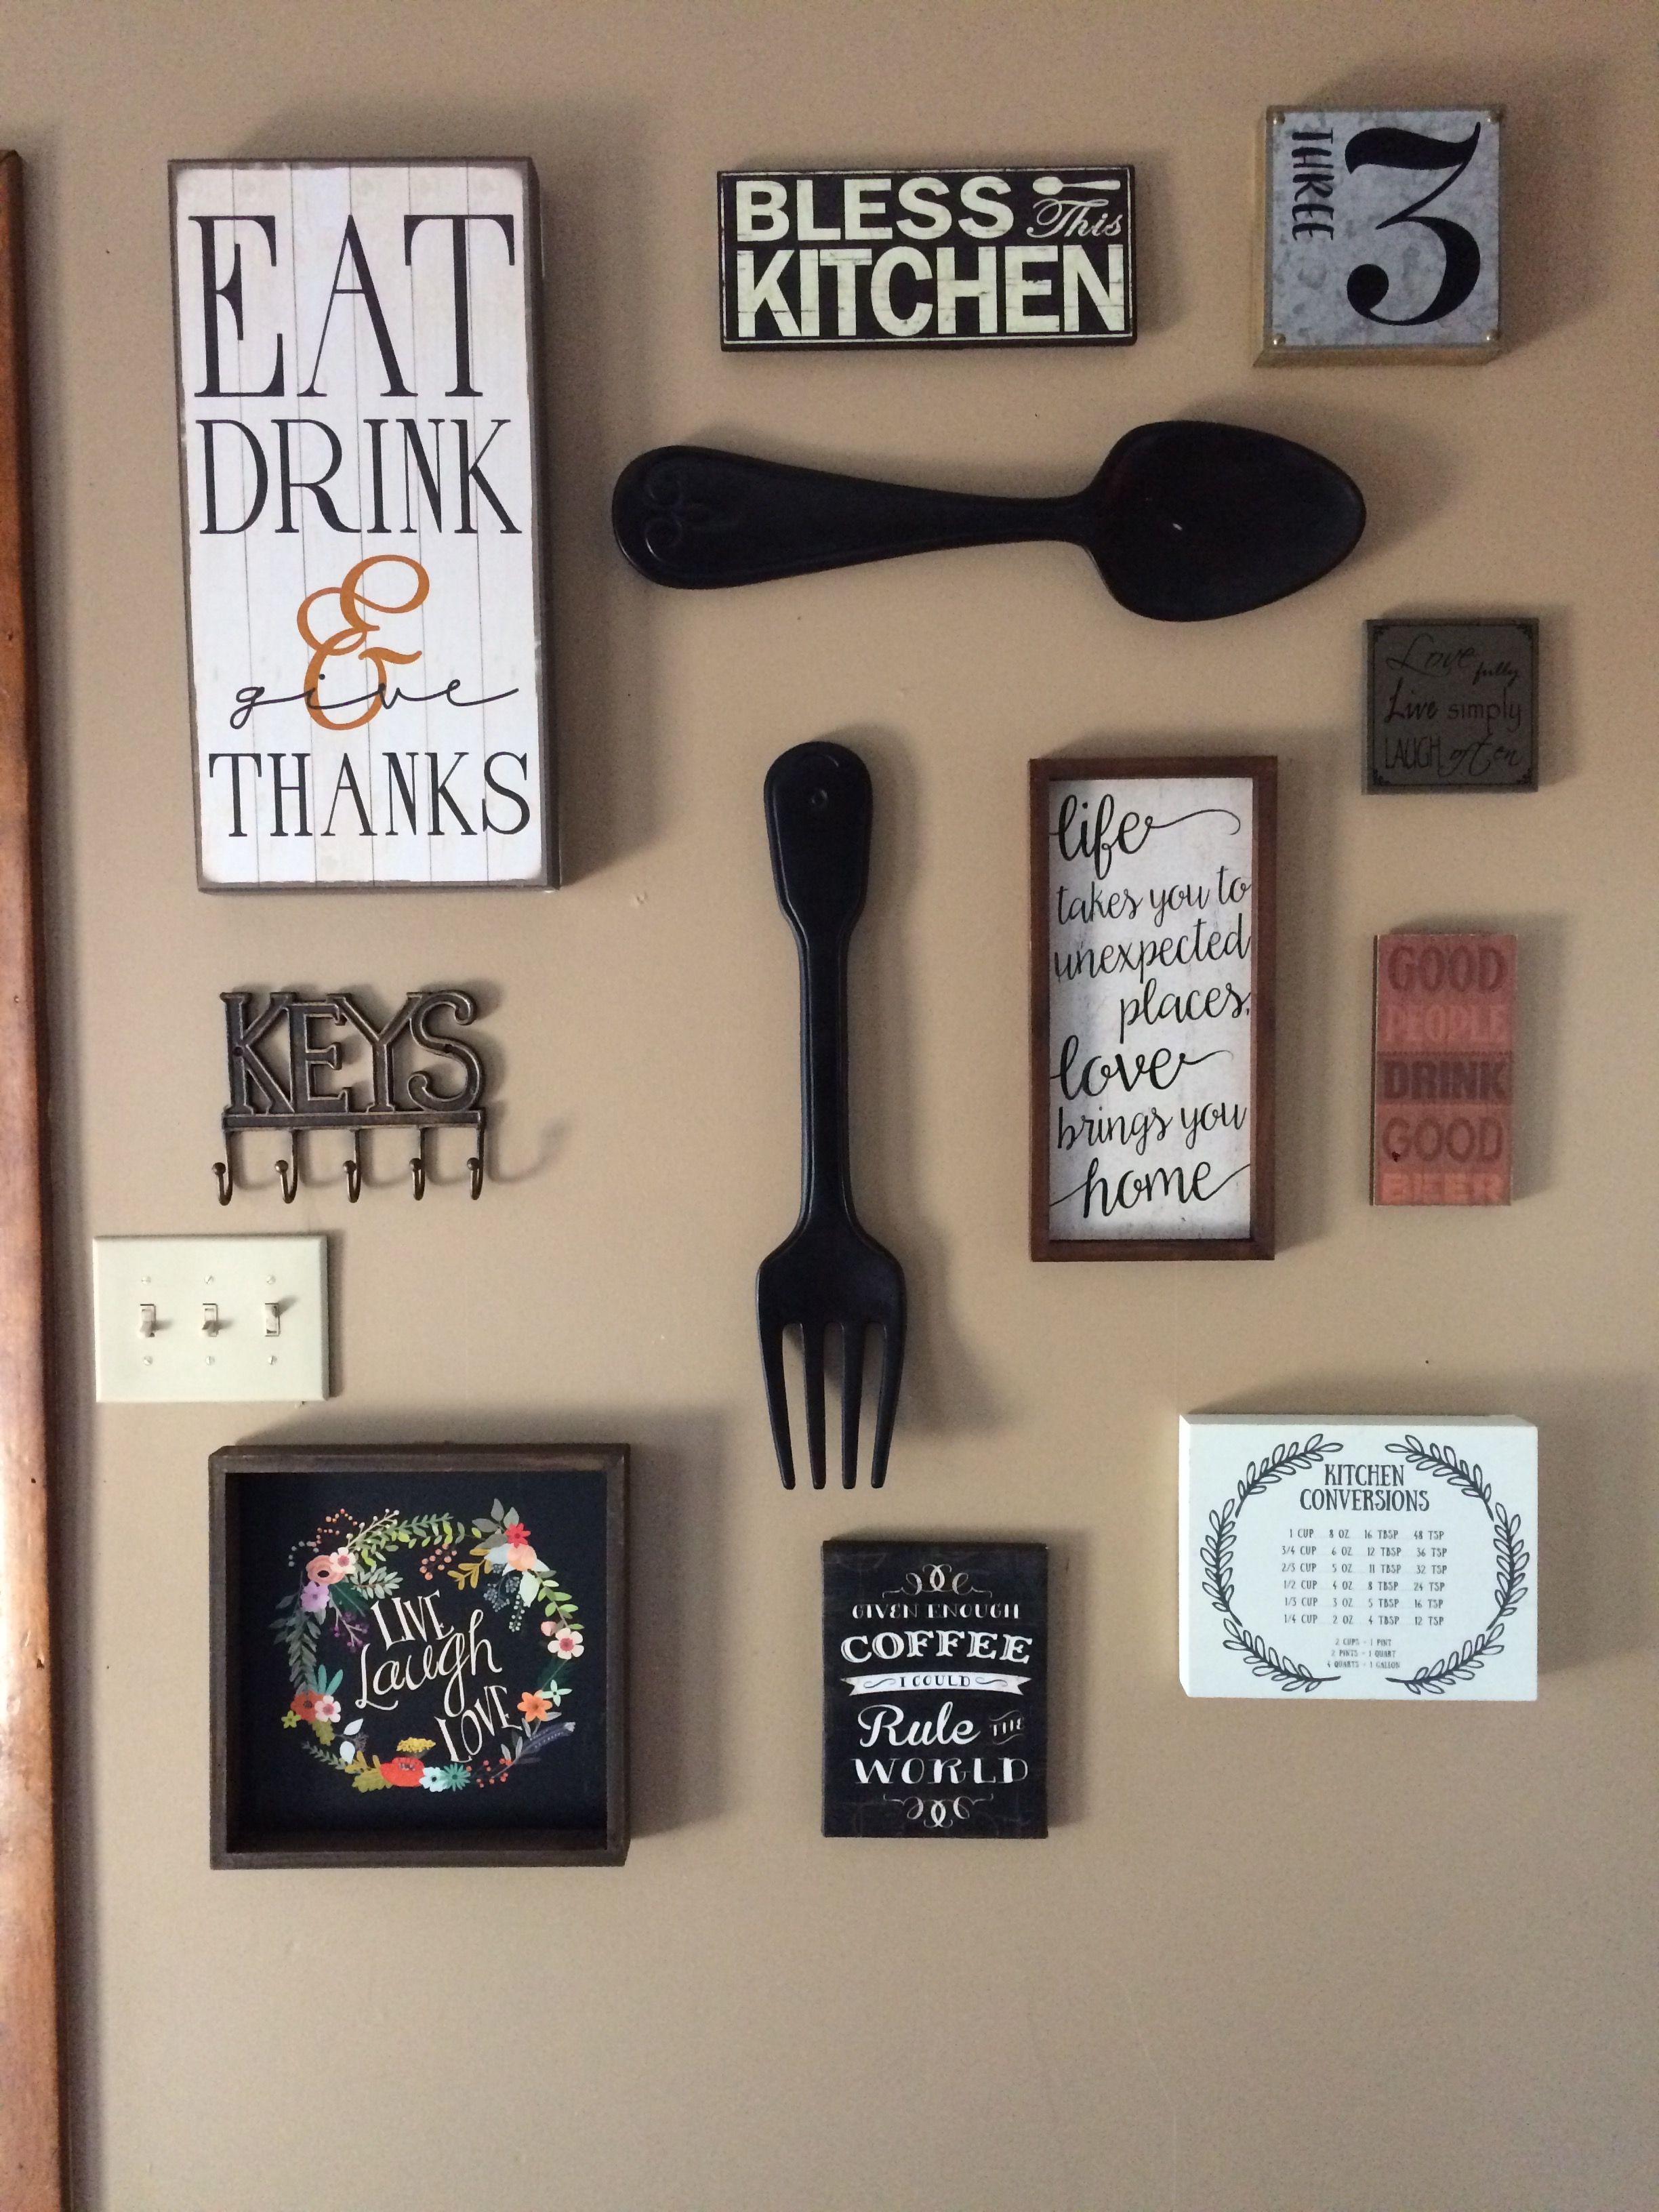 My kitchen gallery wall. All decor from hobby lobby and Ross. Completed the project in 1 hour.  It turned out amazing.